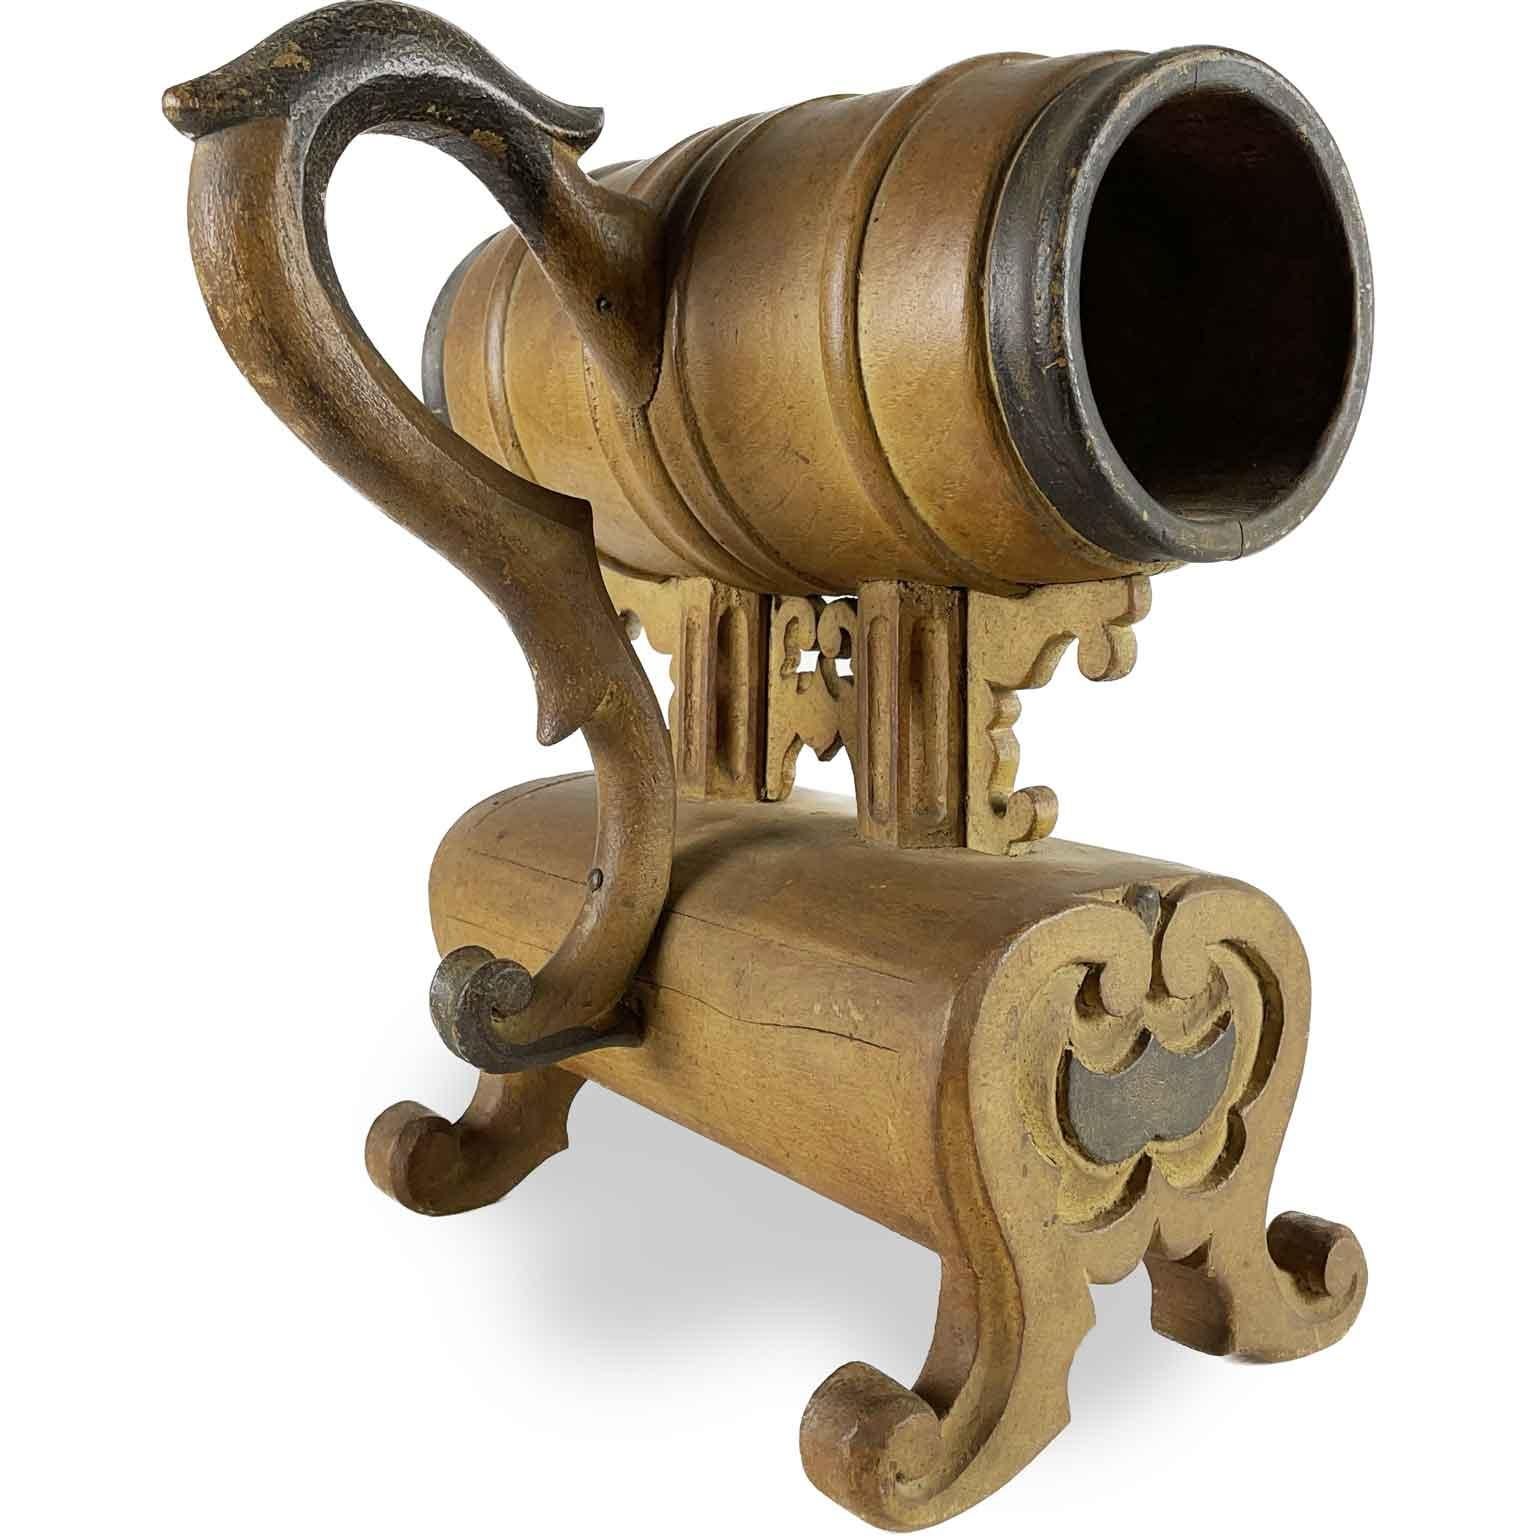 19th century Italian Confraternity Voting Urn of Tuscan origin realized with turned and carved poplar wood. The barrel-shaped central body, in which hands were inserted to insert the ballot ball into one of the two holes connected to the small